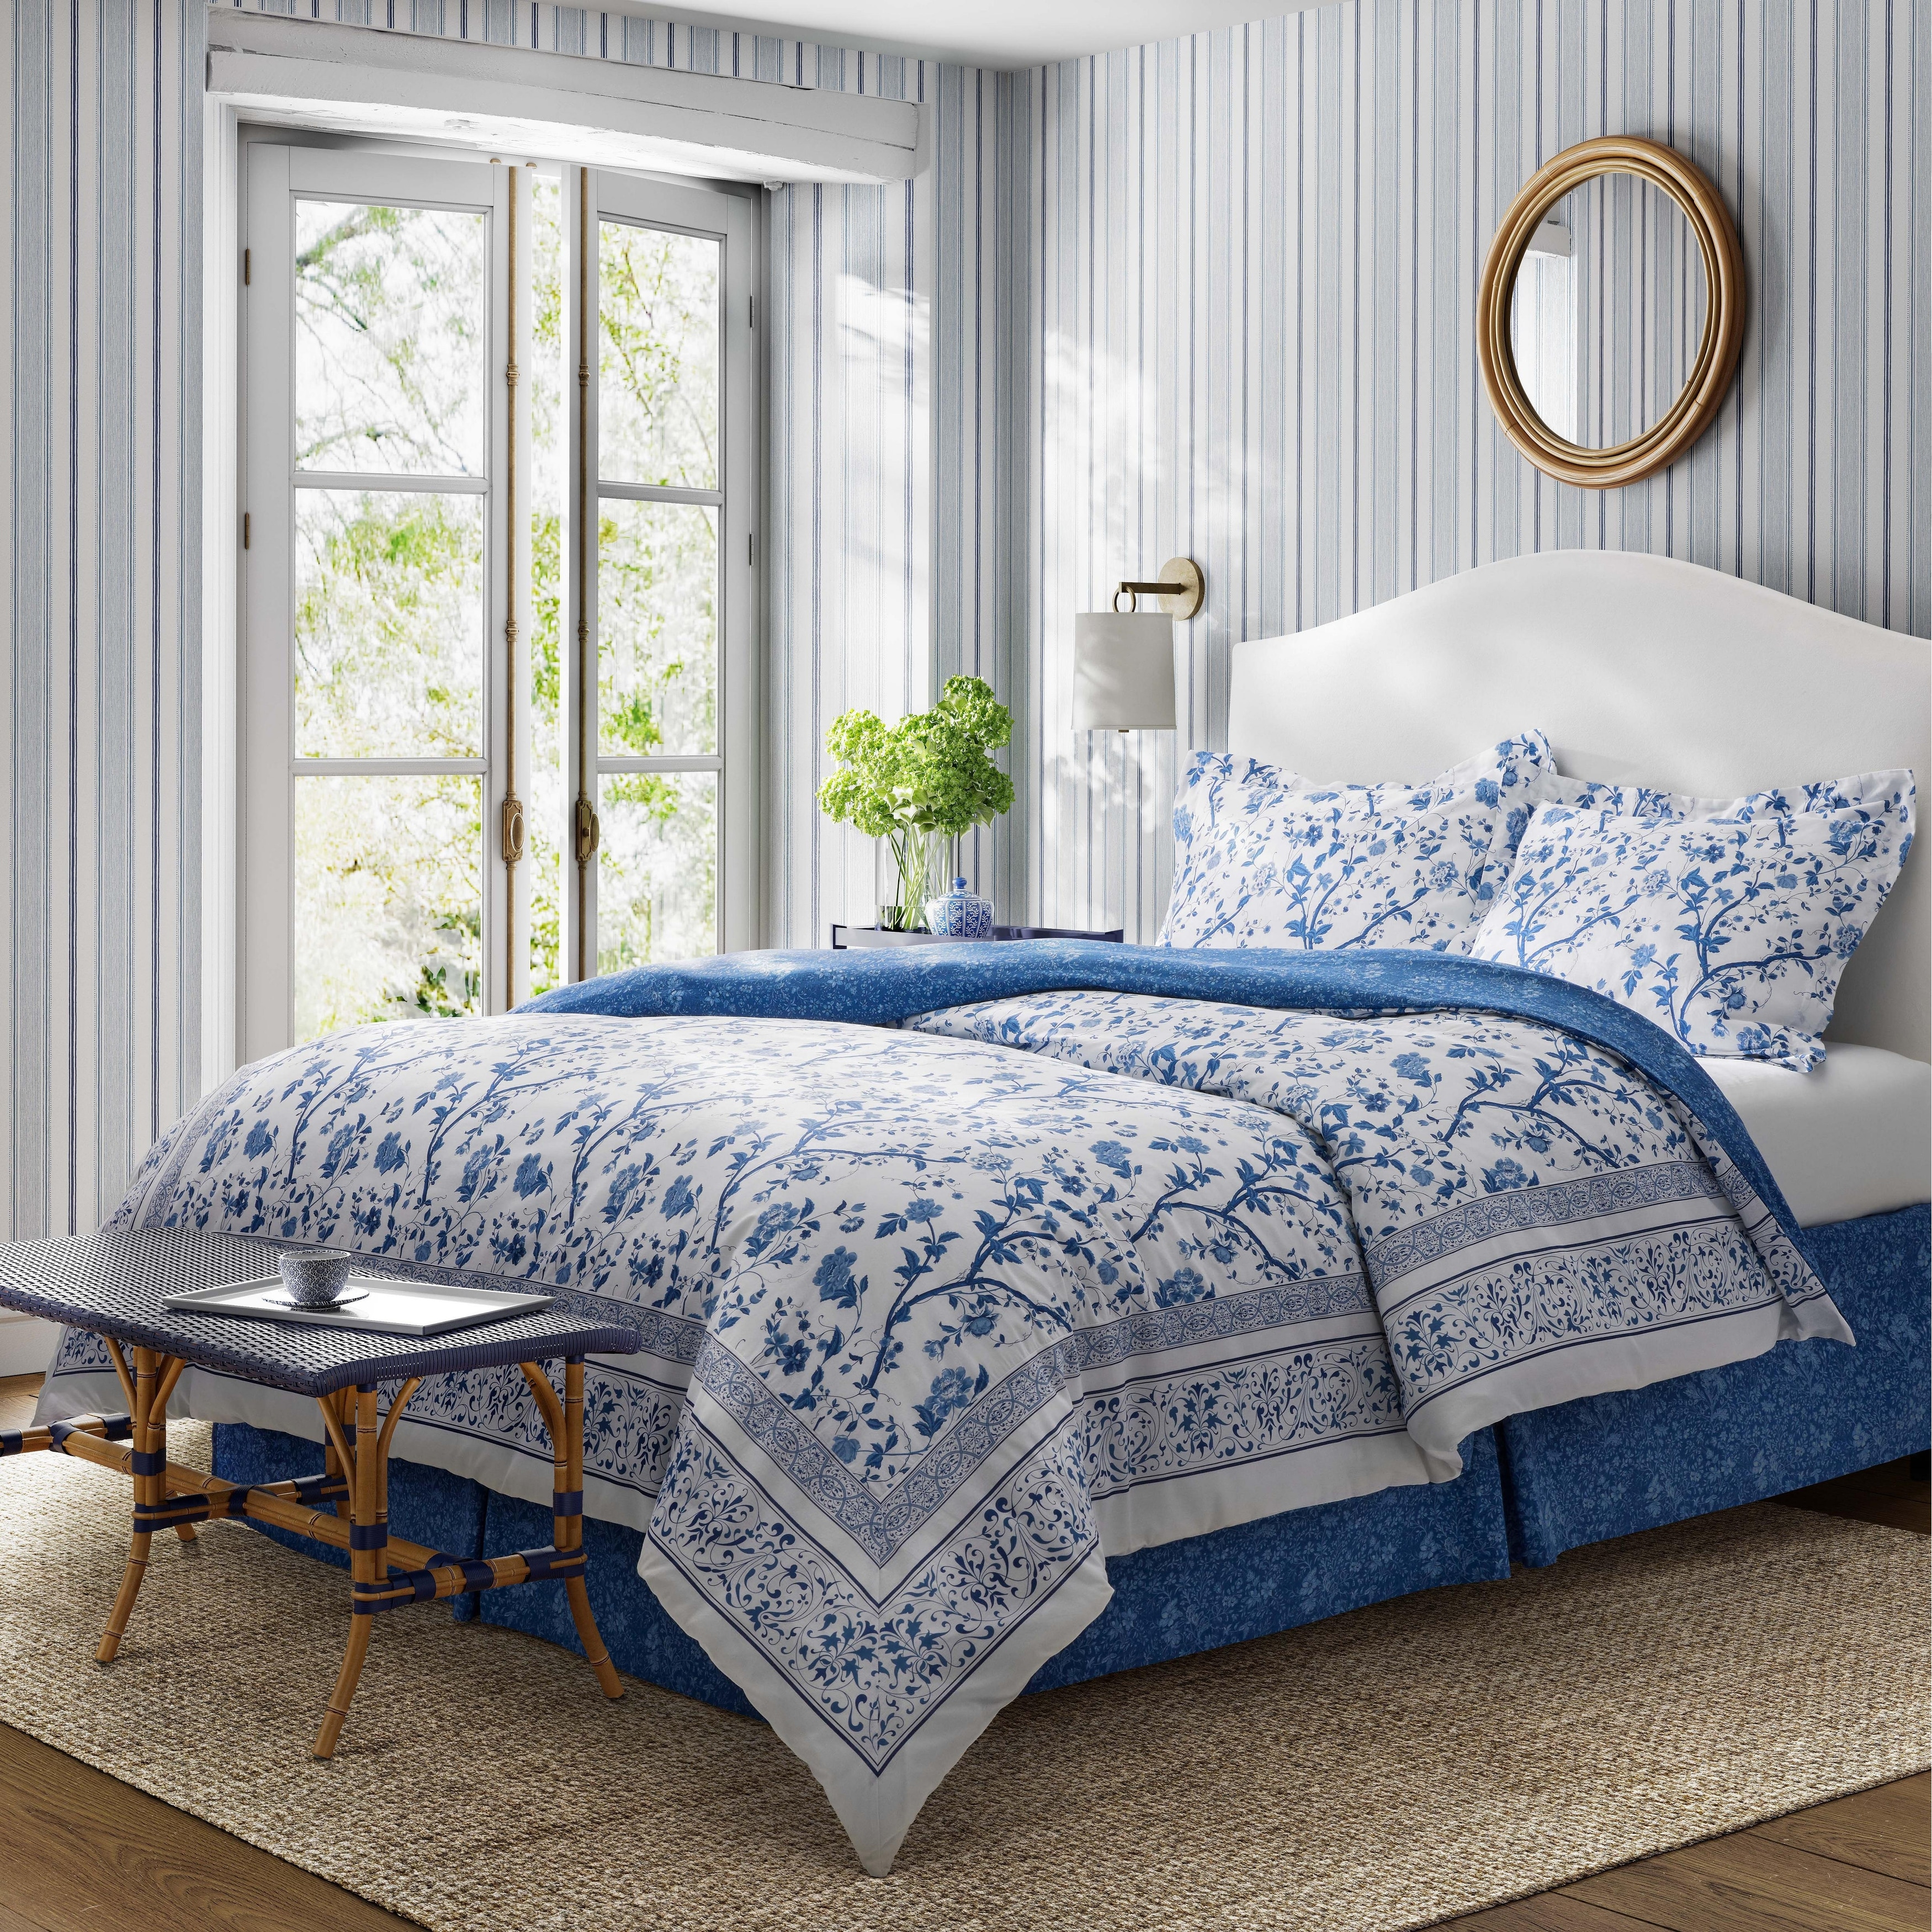 Shabby Chic Laura Ashley Comforters and Sets - Bed Bath & Beyond